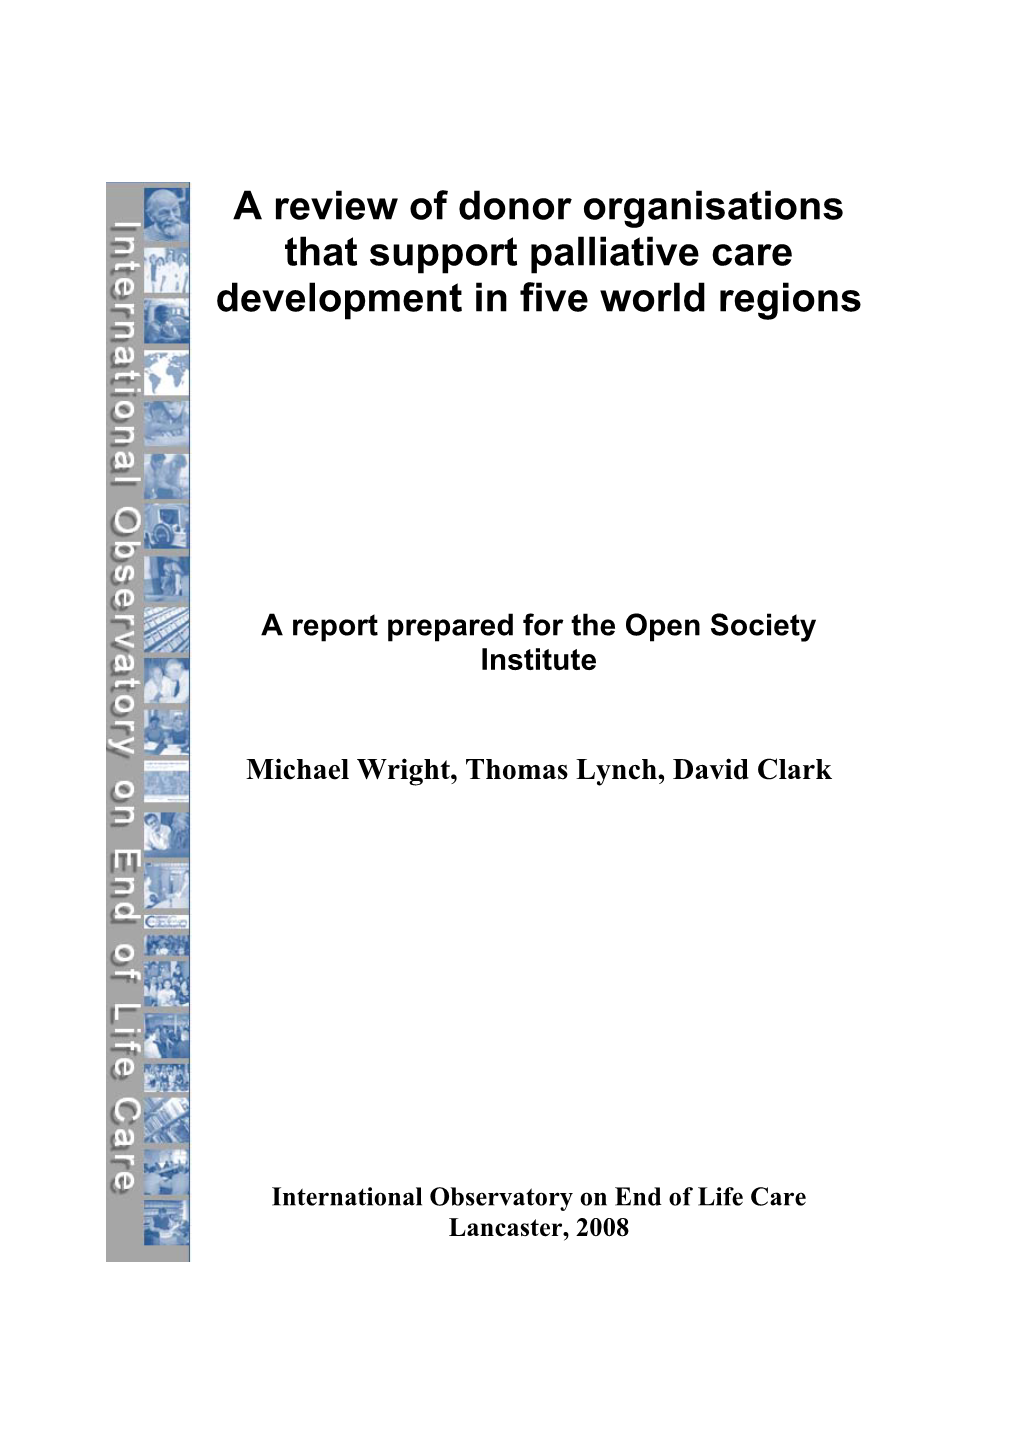 A Review of Donor Organisations That Support Palliative Care Development in Five World Regions